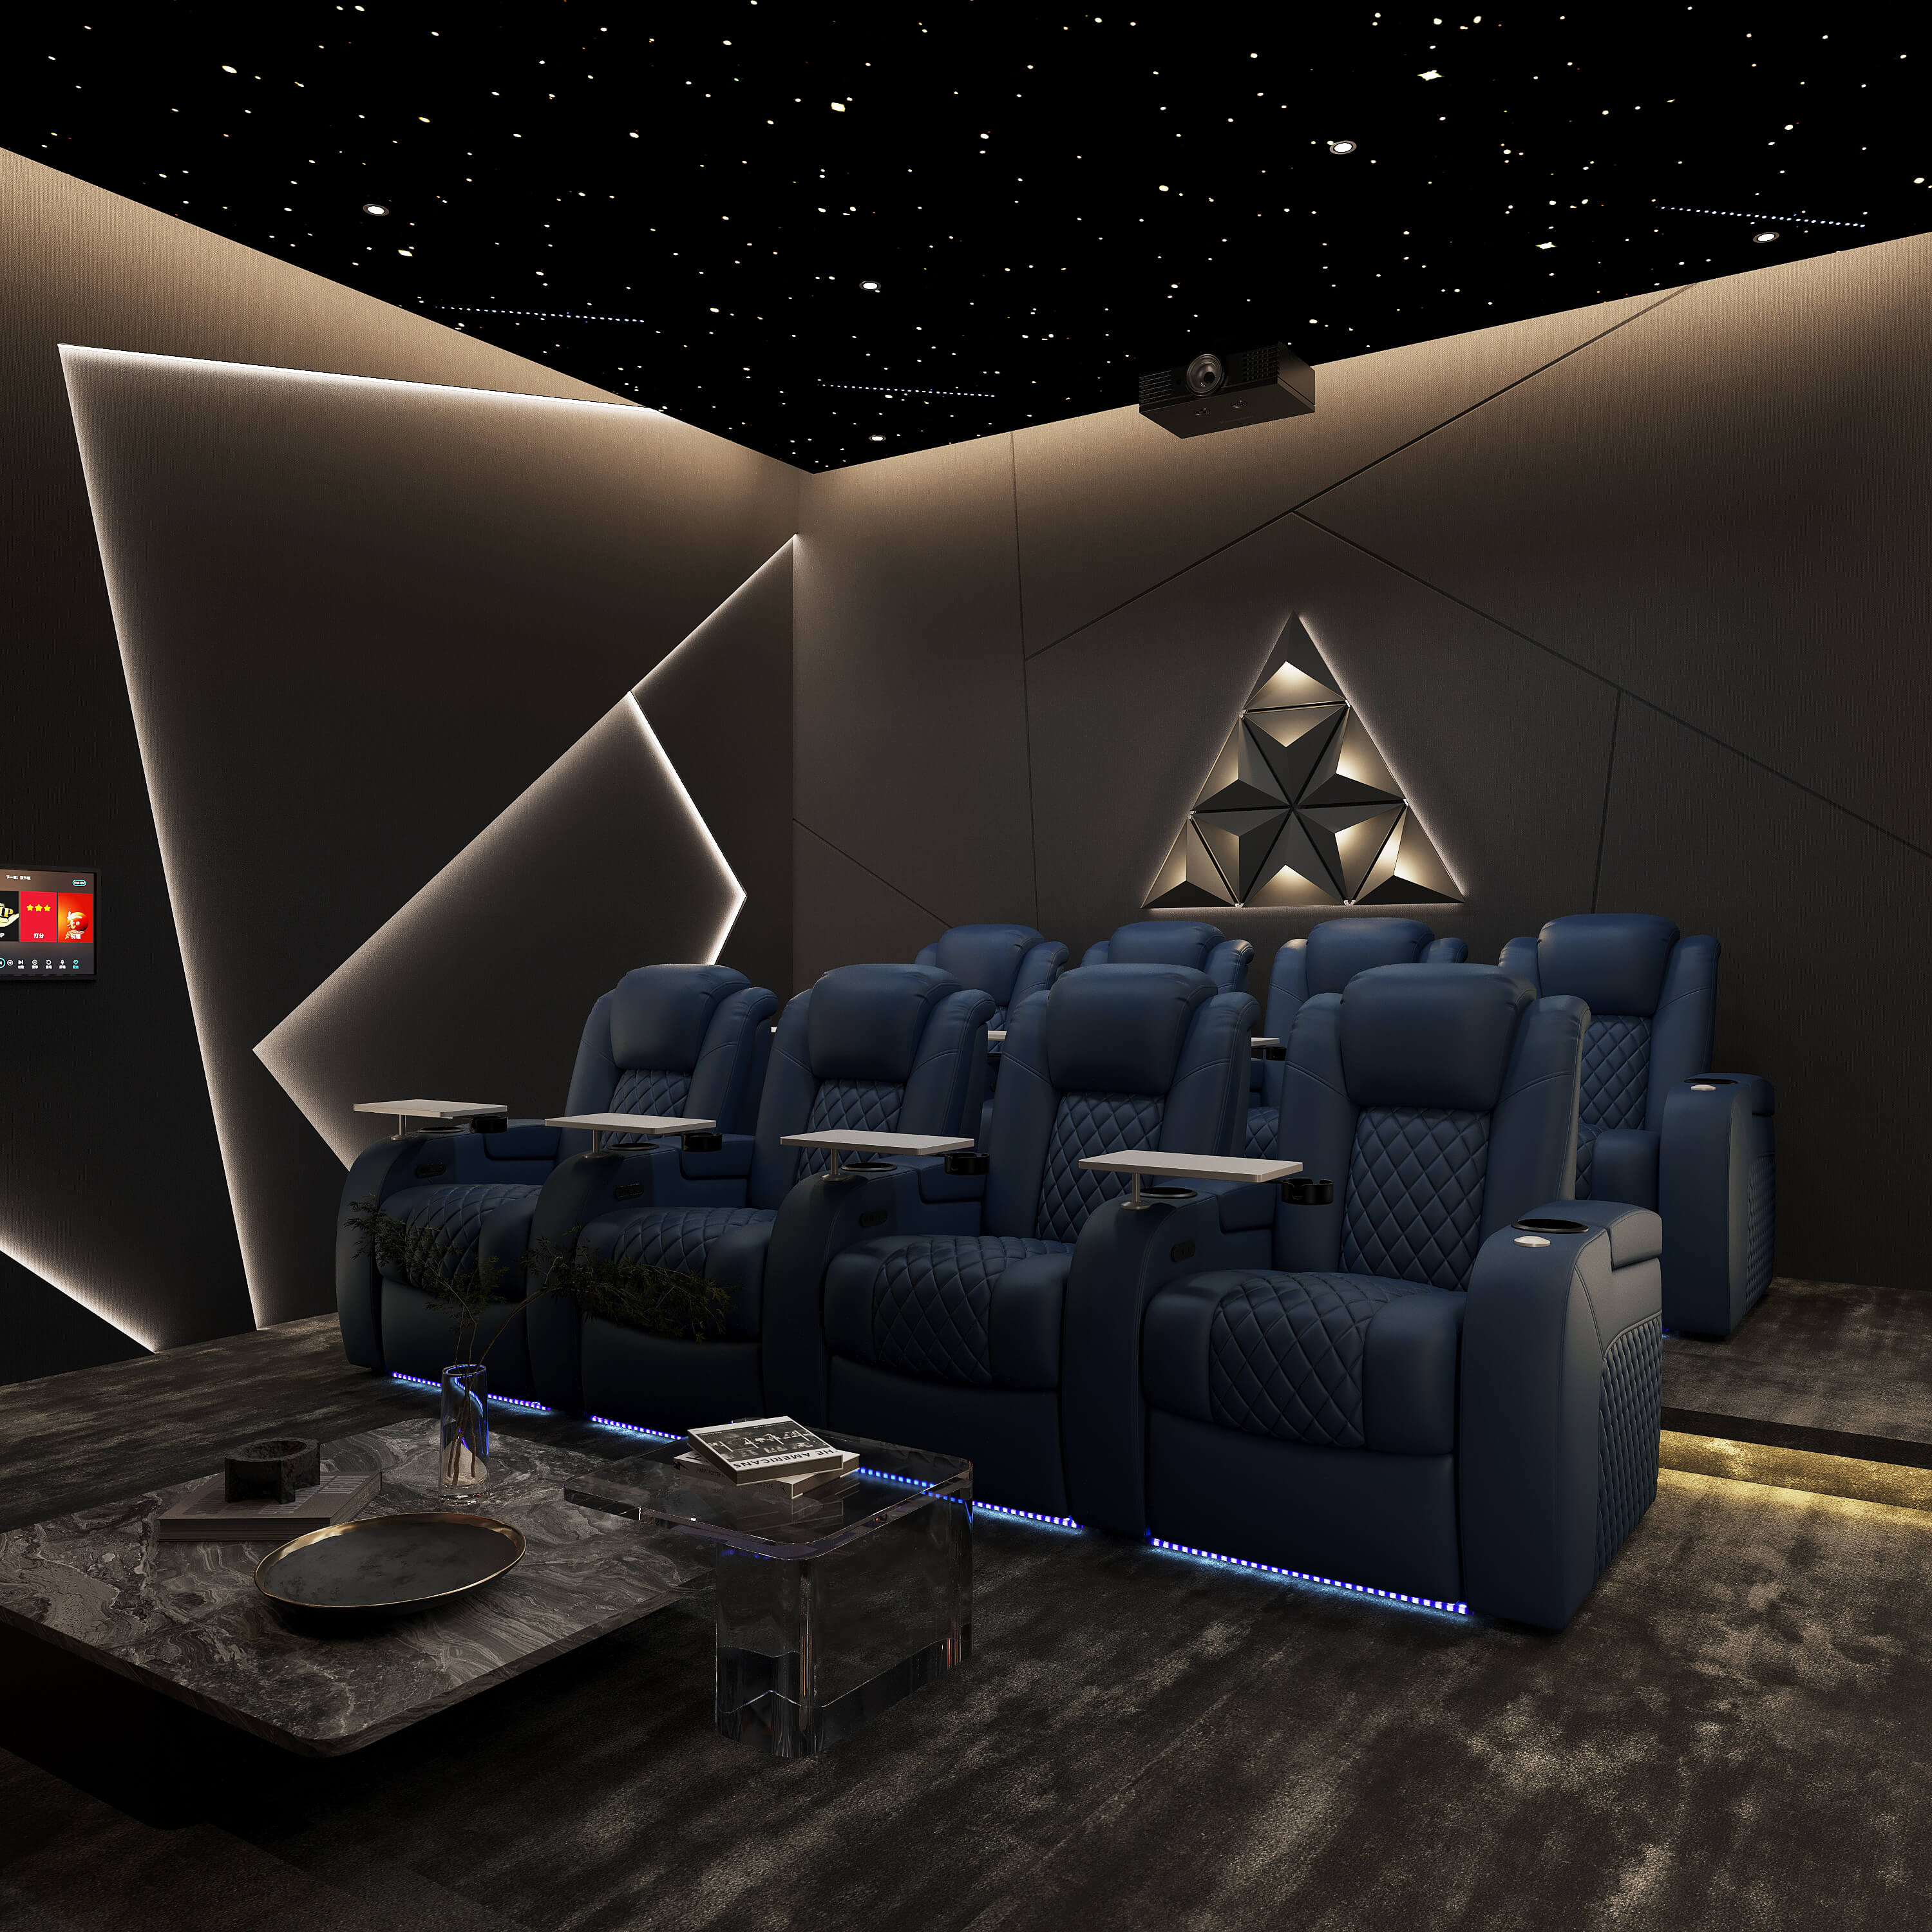 Home theater seating and layout